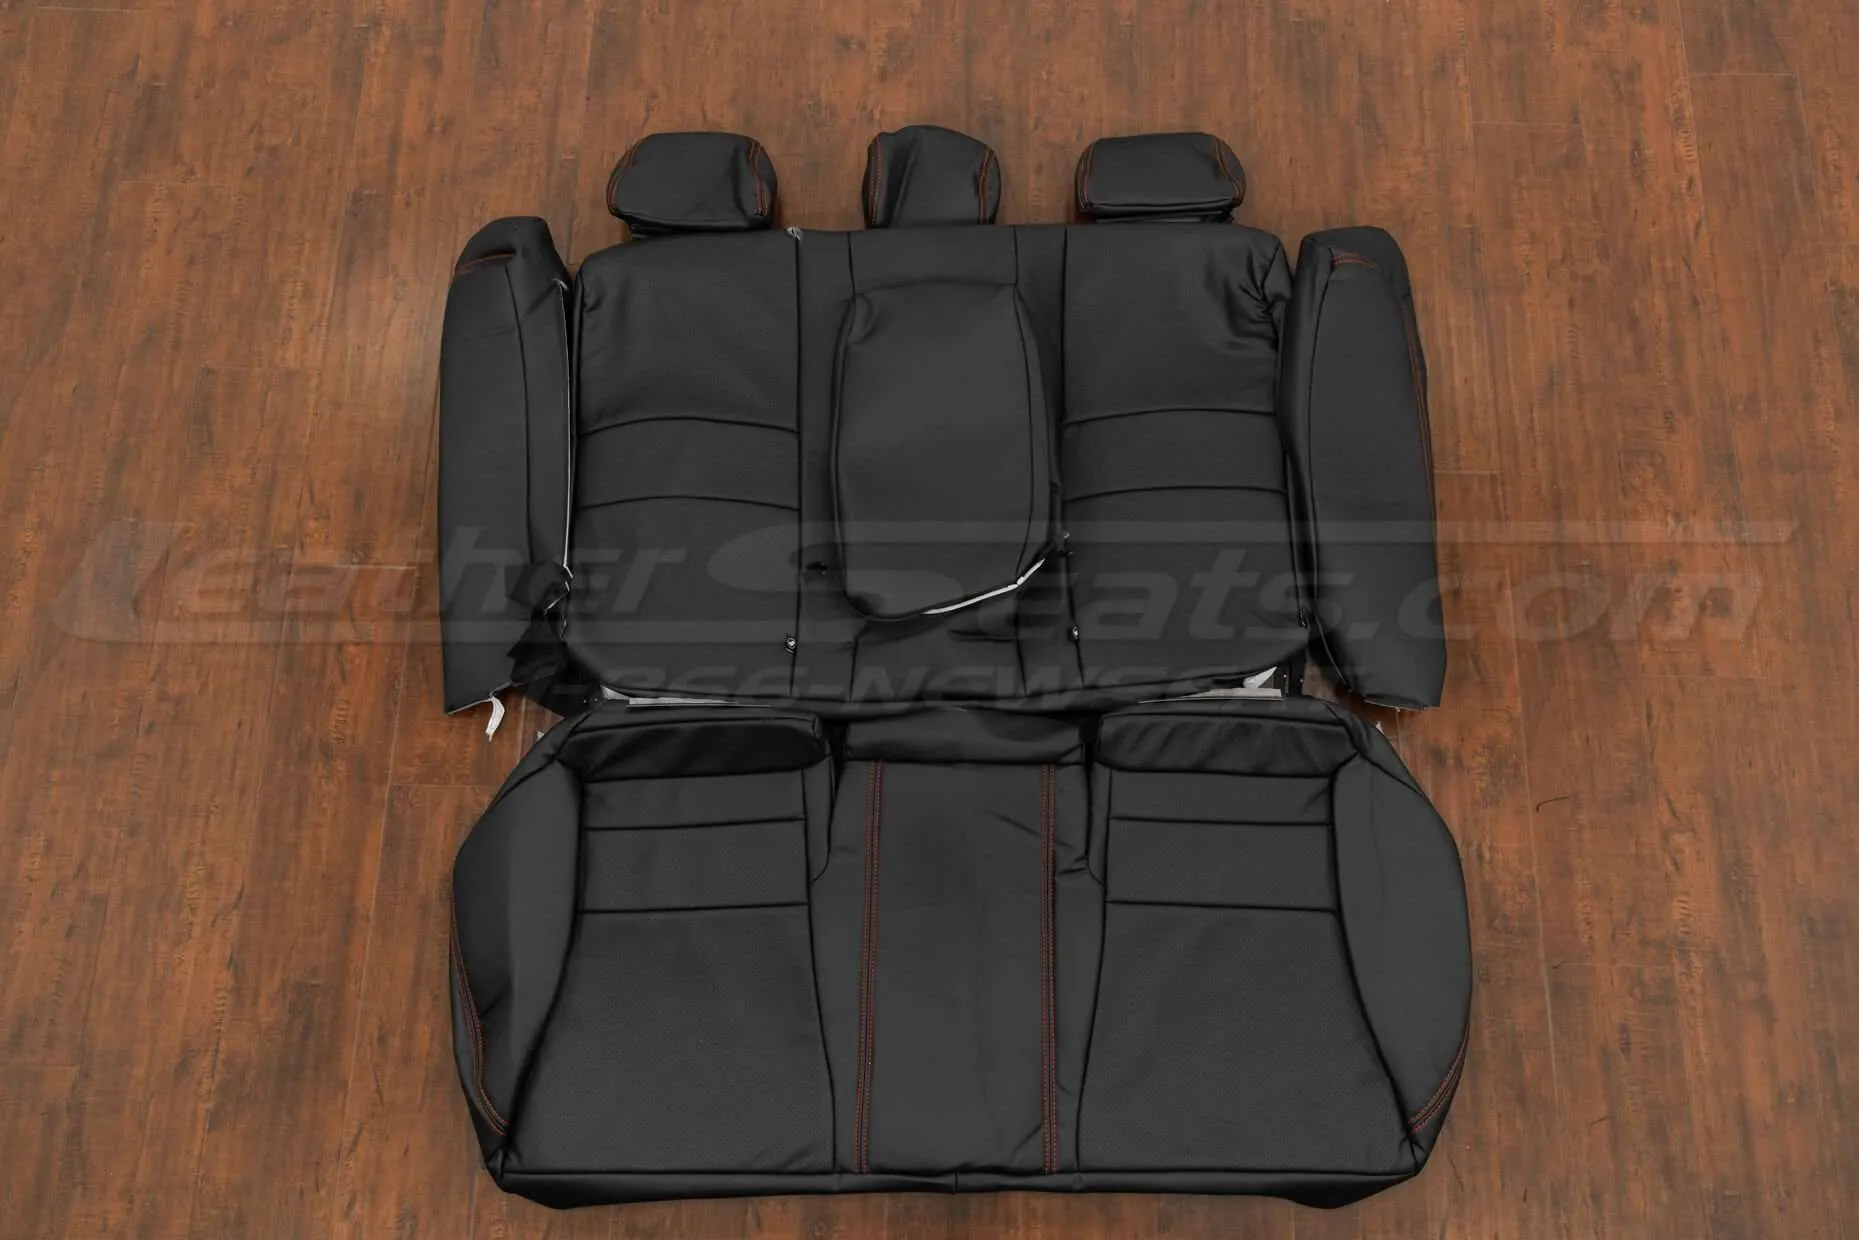 Honda Accord Leather Kit.- Black - Rear seat upholstery with bolsters